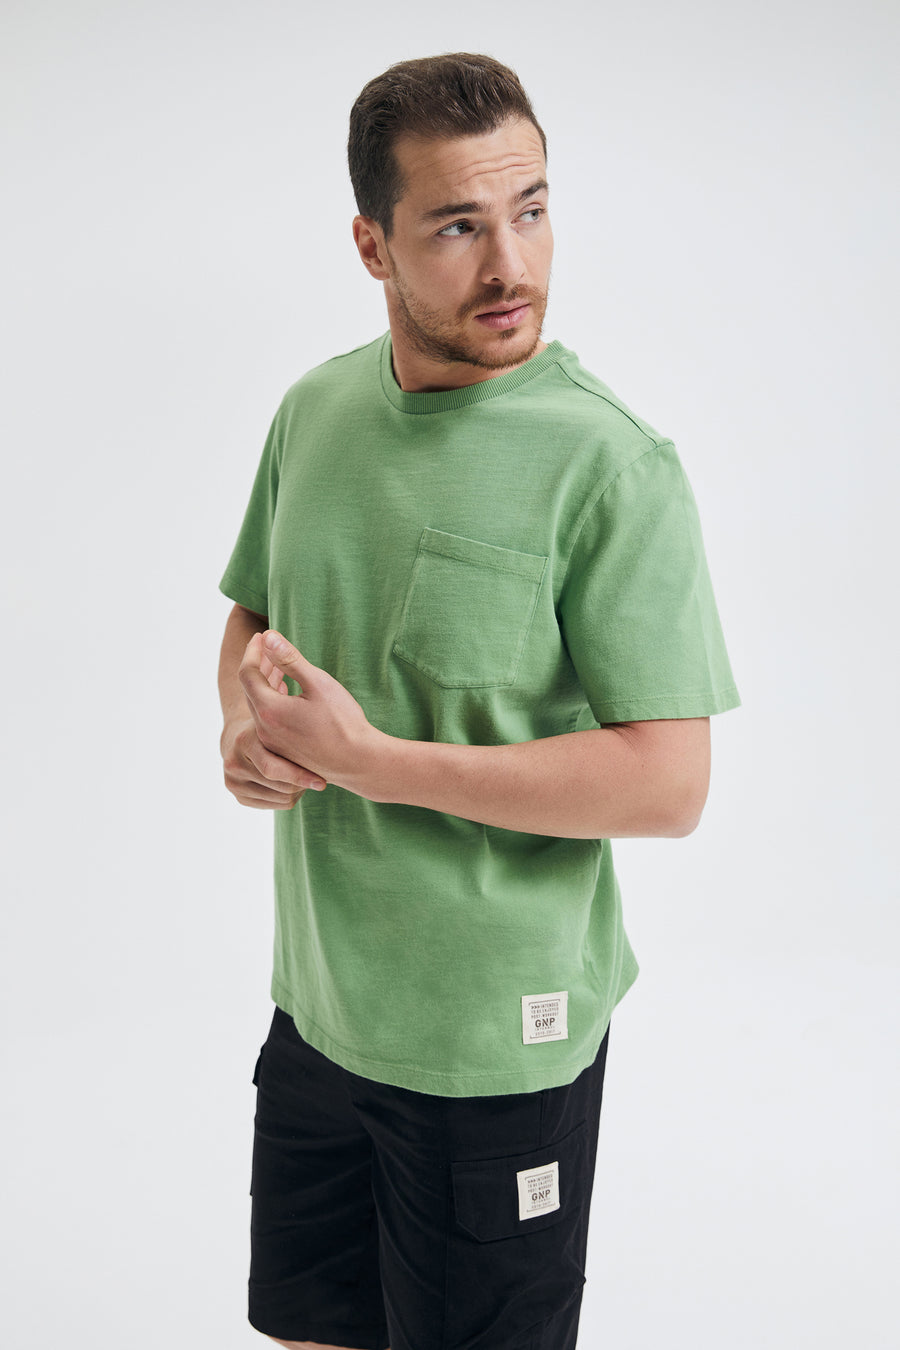 GNP Acid Washed Green Tshirt With Pocket Detail